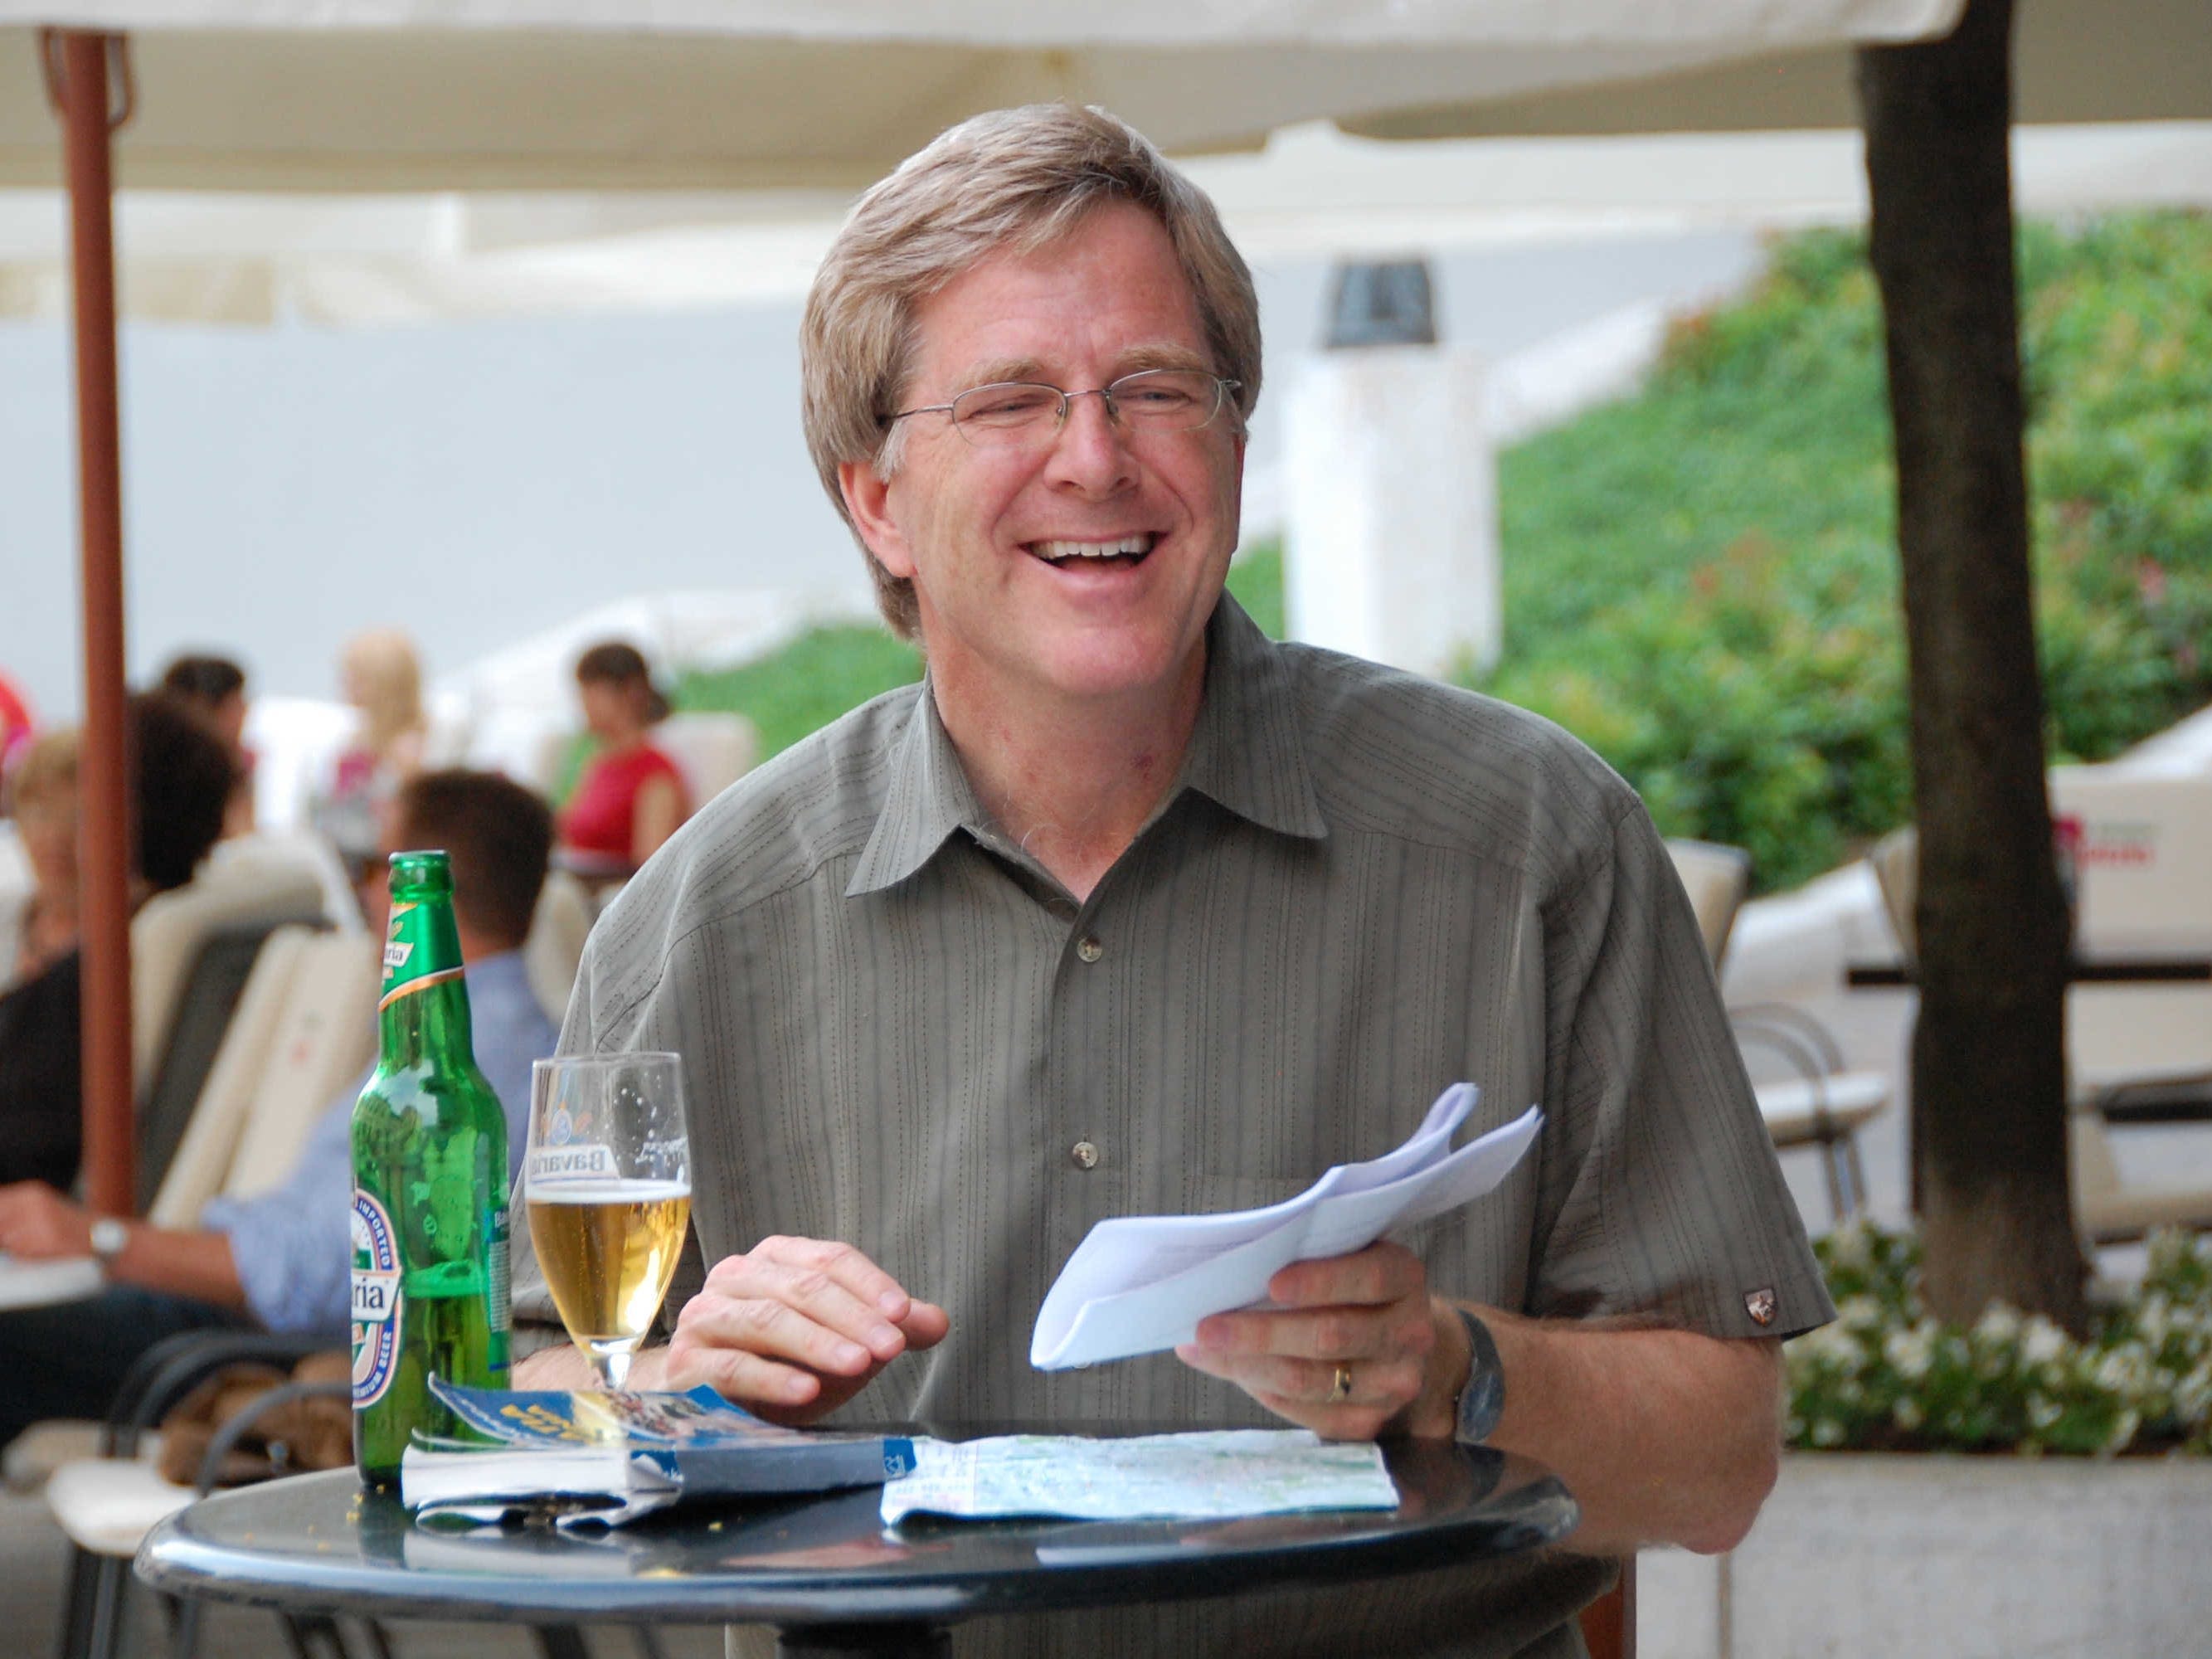 Travel expert Rick Steves says he only flies in economy: 'It never occurred to me that I'm suffering'